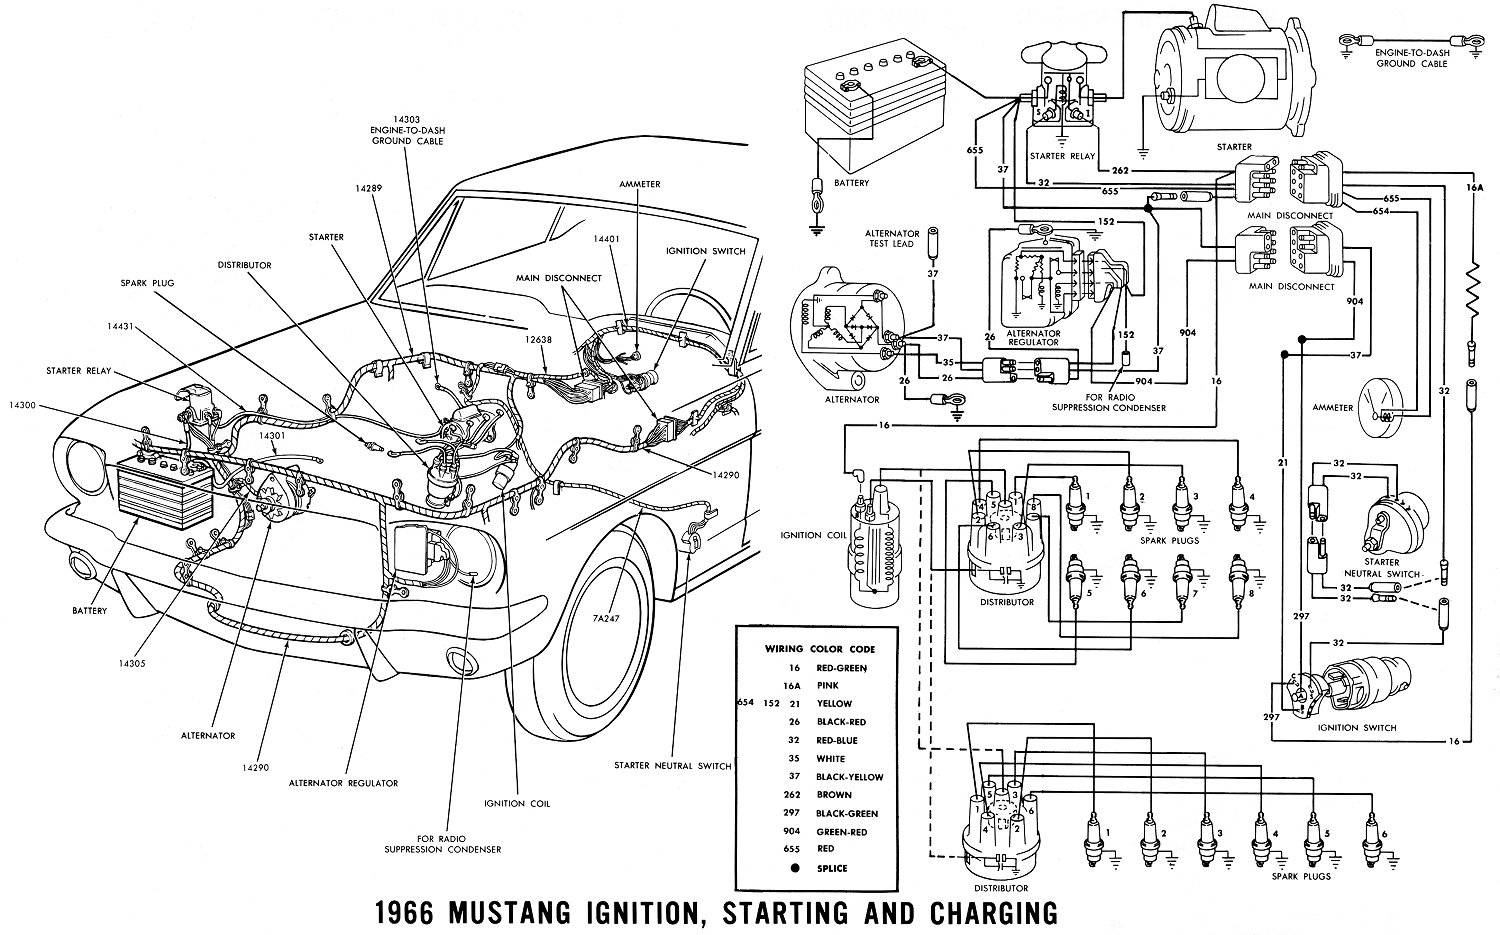 Ford 289 Coil Wiring - Wiring Diagram Detailed - Ignition Coil Wiring Diagram